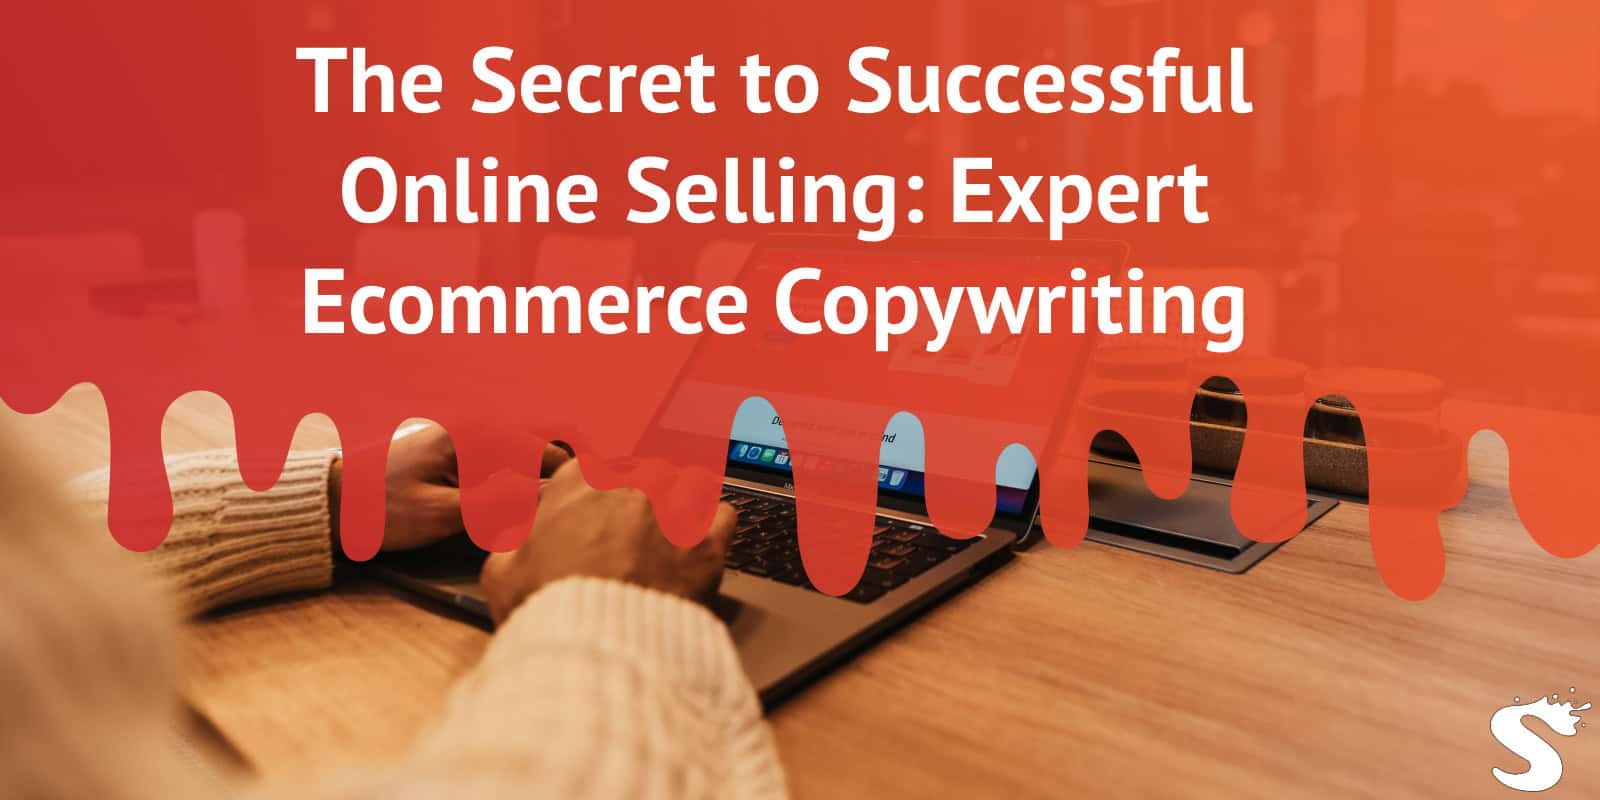 The Secret to Successful Online Selling: Expert Ecommerce Copywriting